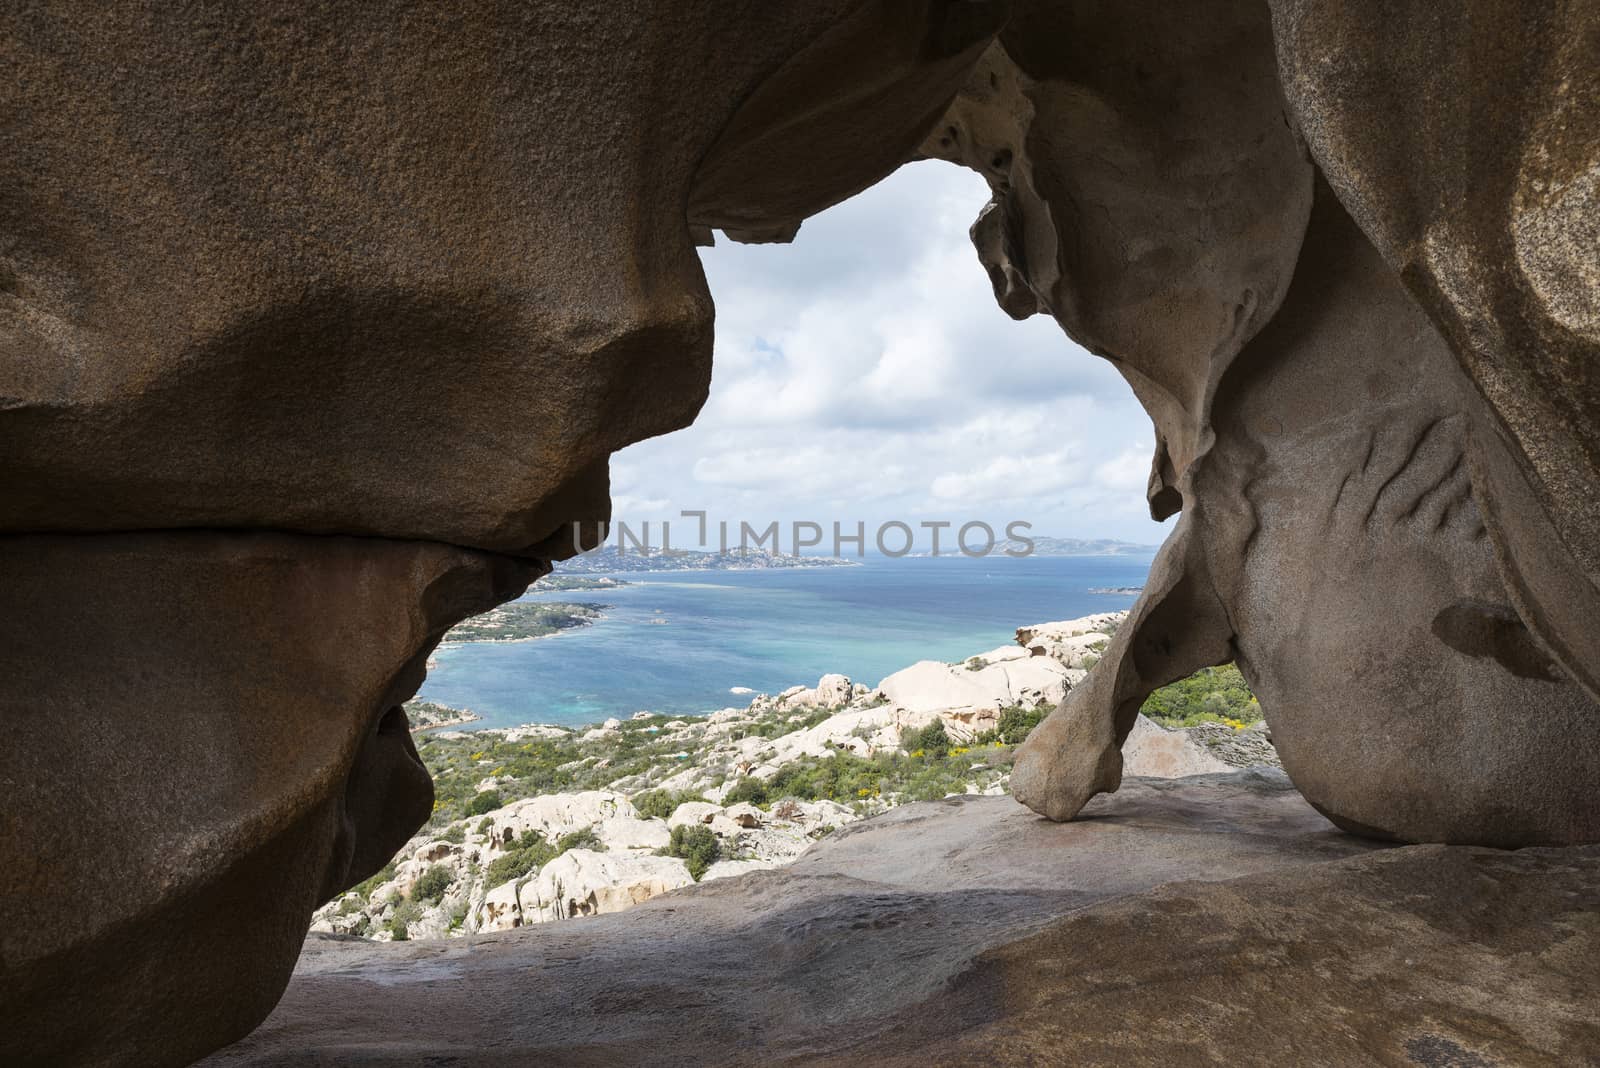 scene from the ber rock in sardinia by compuinfoto